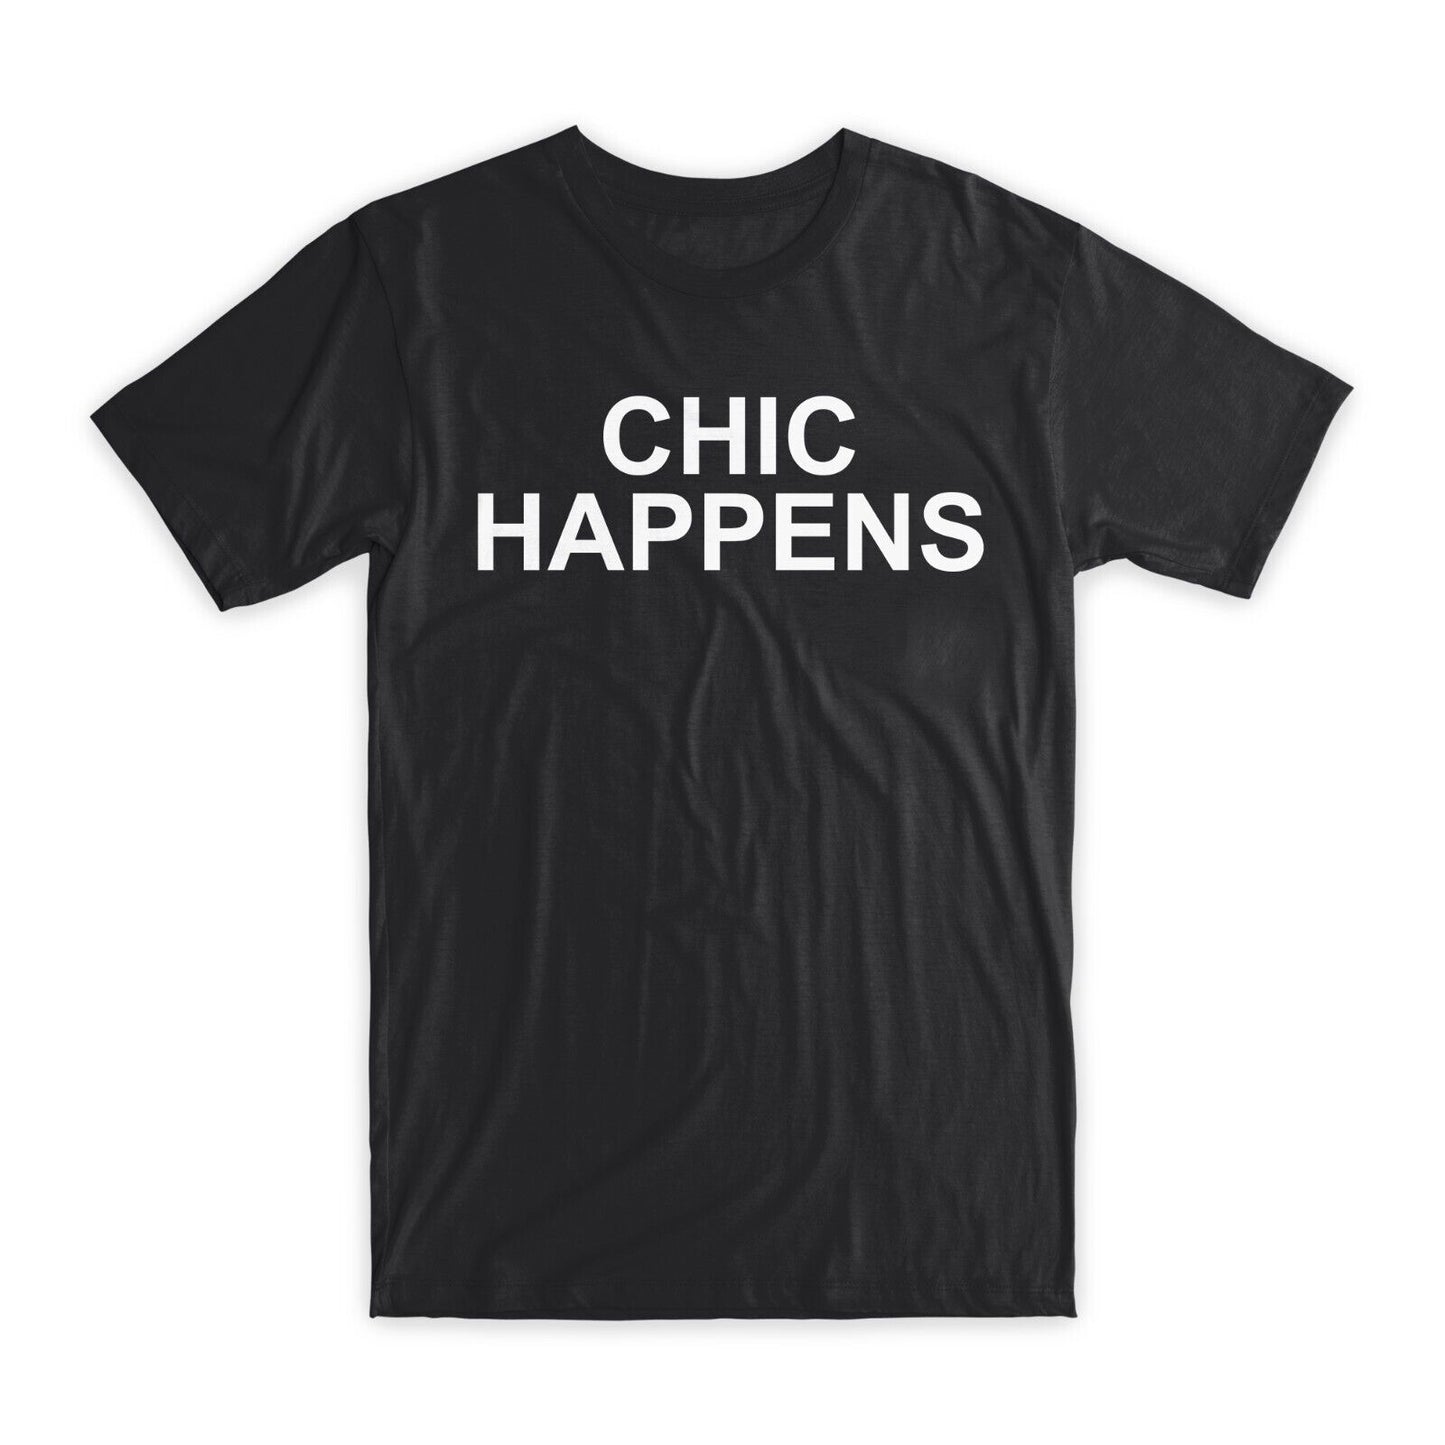 Chic Happens T-Shirt Premium Soft Cotton Crew Neck Funny Tees Novelty Gifts NEW